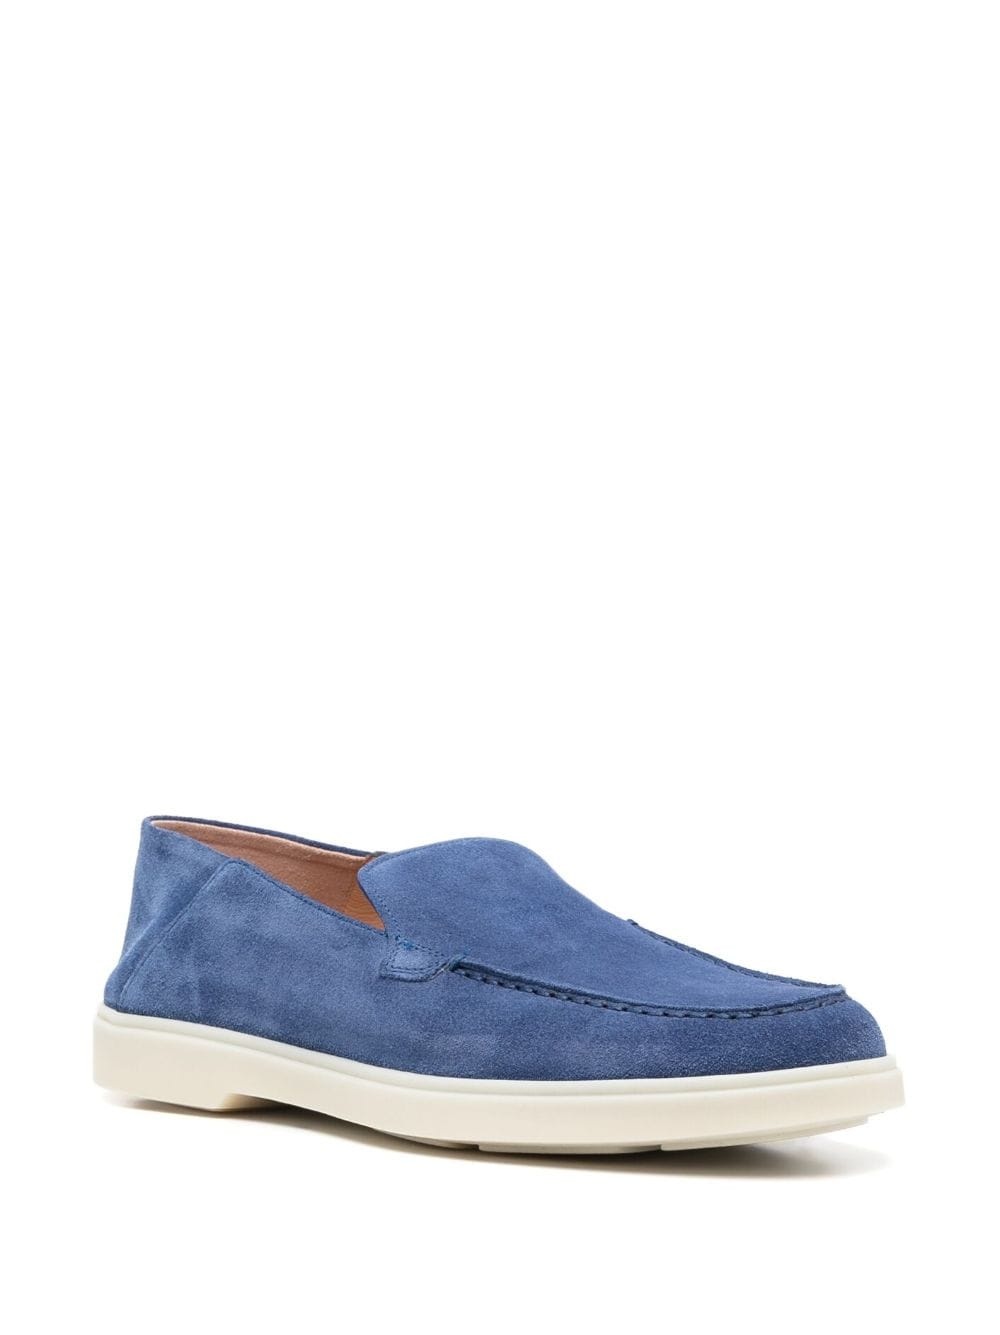 almond-toe suede loafers - 2